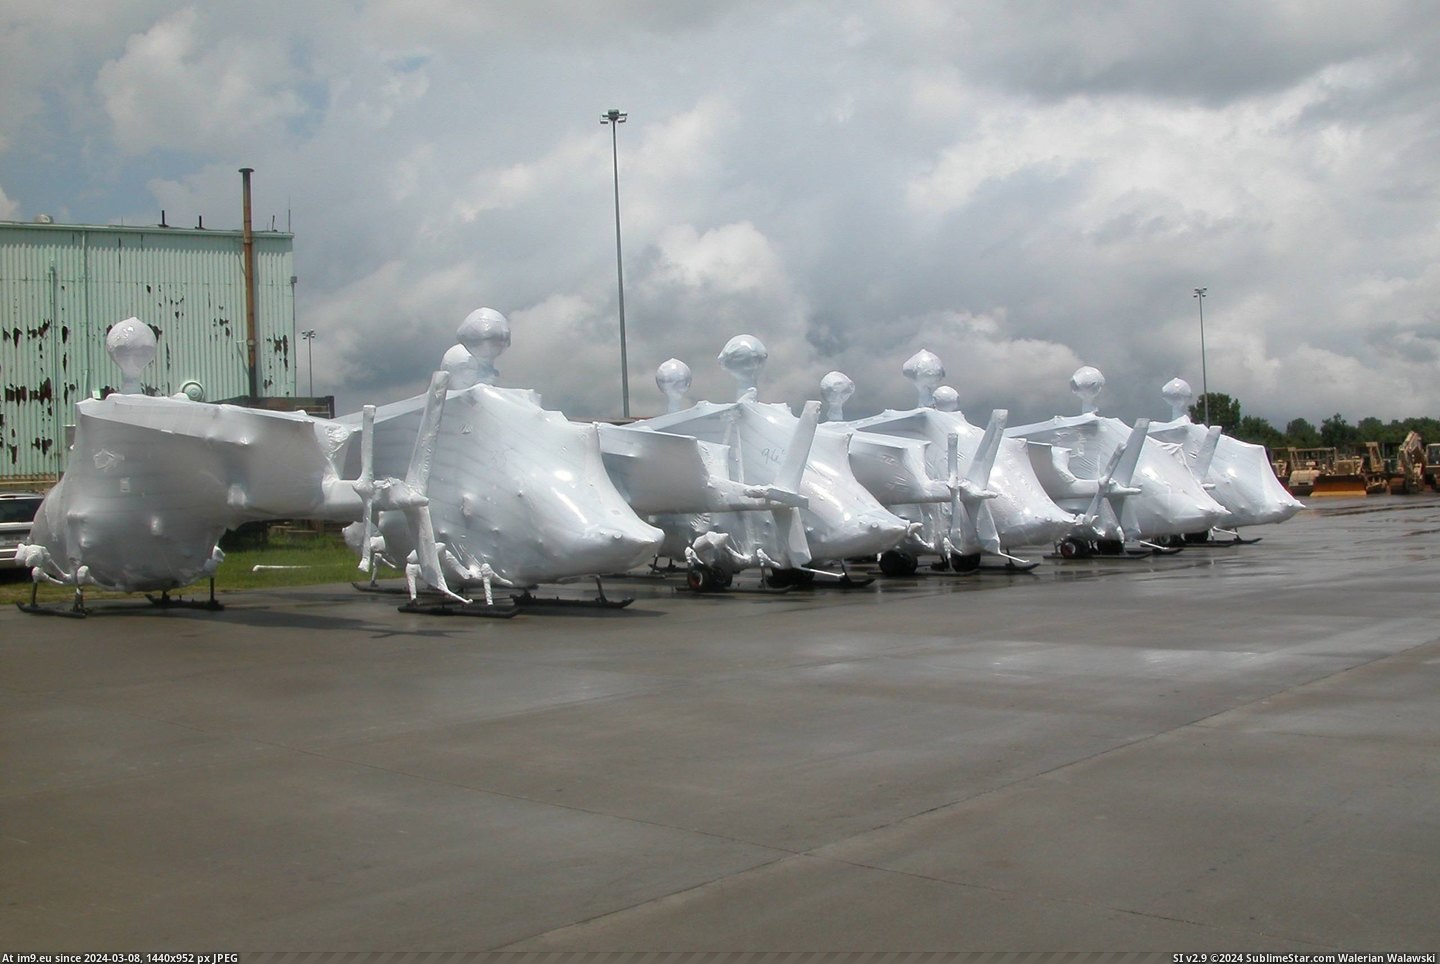 #Wrapped #Iraq #Shrink #Kiowa #Helicopters #Shipped [Mildlyinteresting] Shrink wrapped OH-58 Kiowa helicopters being shipped to Iraq. Pic. (Image of album My r/MILDLYINTERESTING favs))